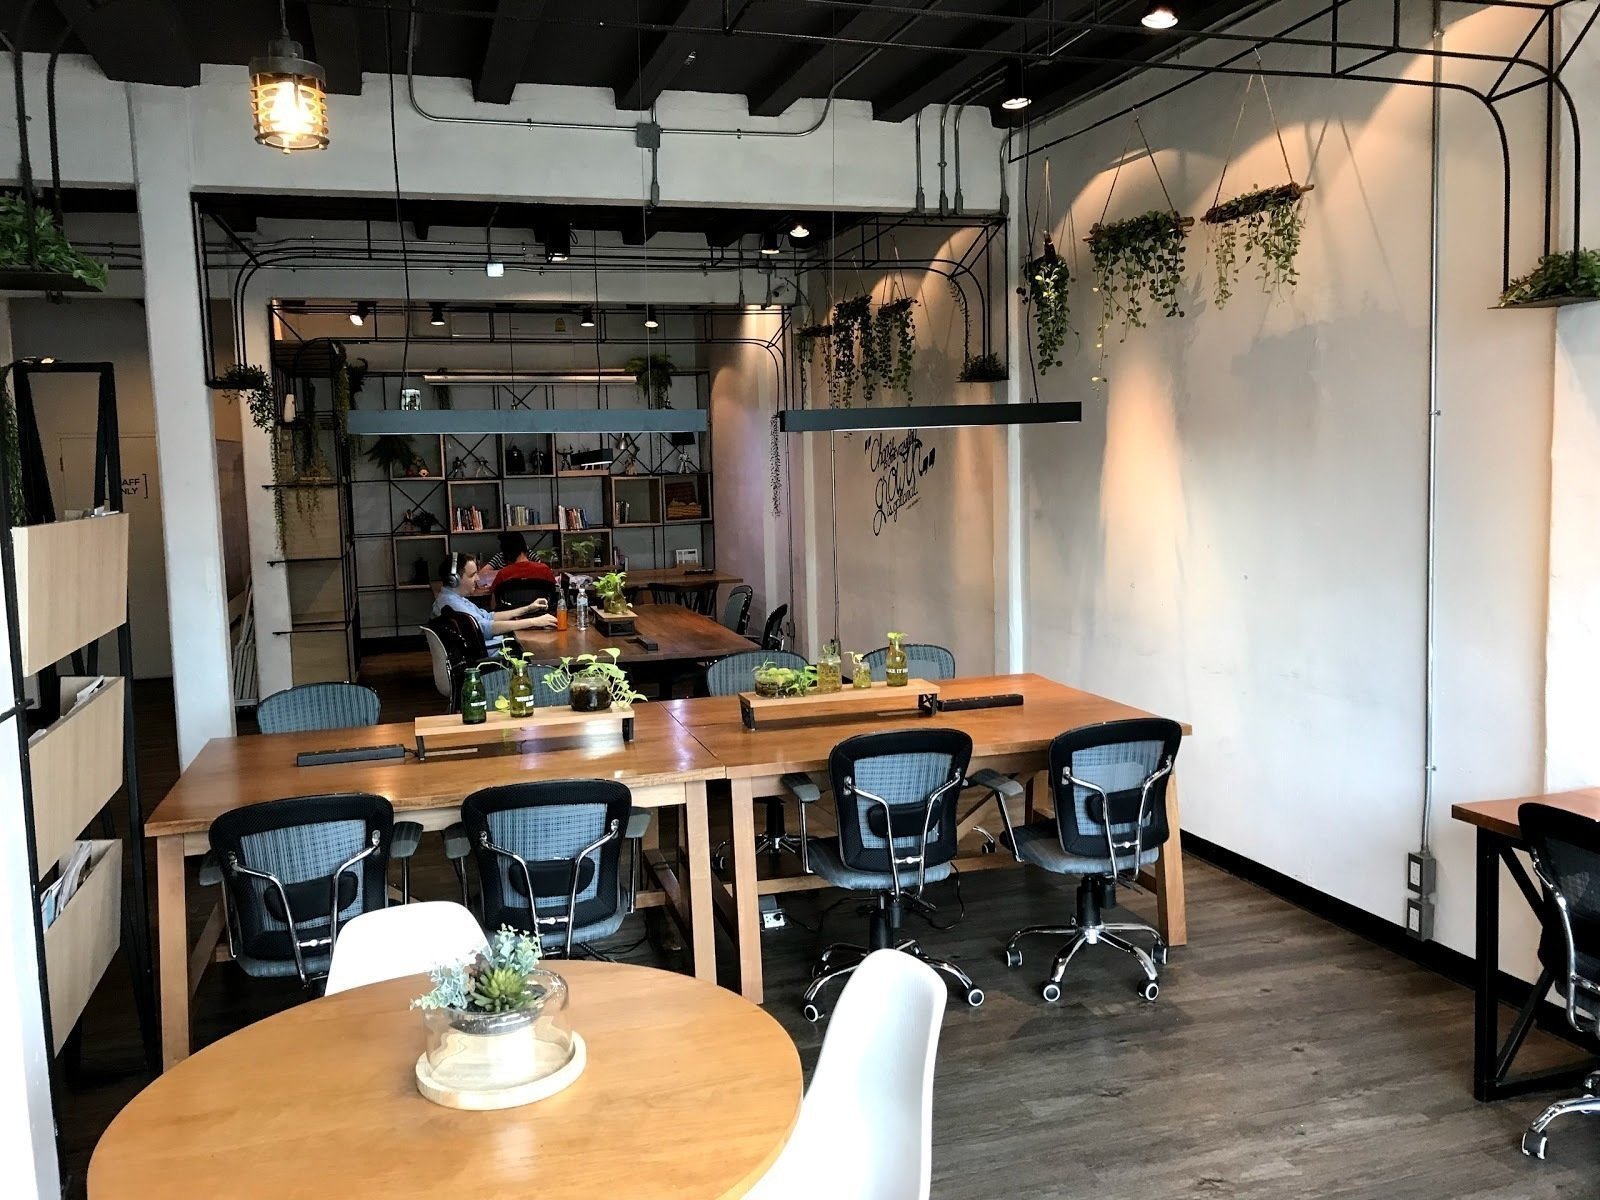 <span class="translation_missing" title="translation missing: en.meta.location_title, location_name: Growth cafe &amp; co., city: Bangkok">Location Title</span>